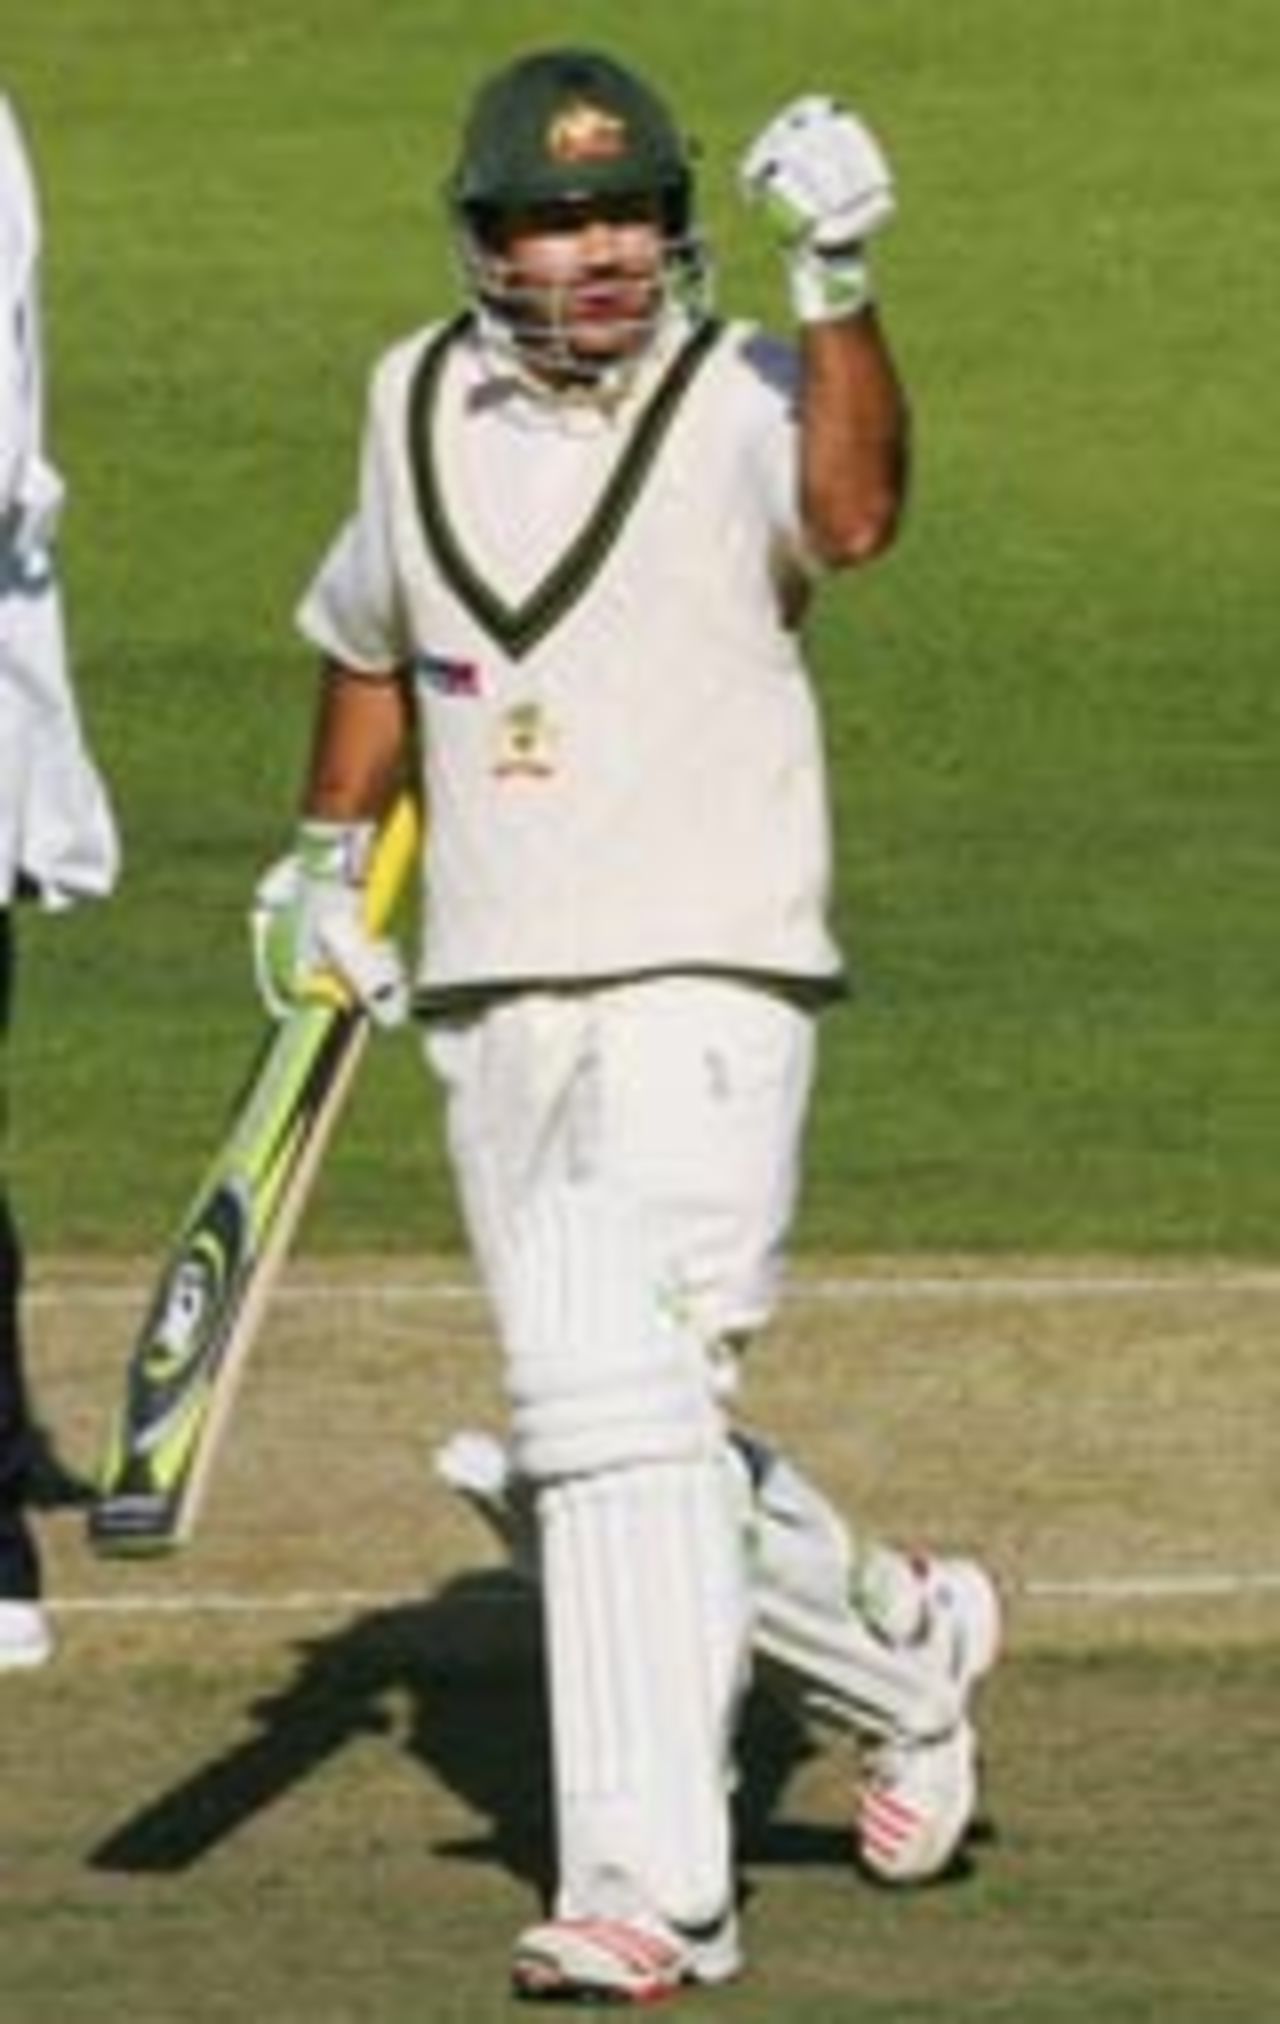 Ricky Ponting with clenched fists after the victorye, New Zealand v Australia, 1st Test, Christchurch, 4th day, March 13, 2005